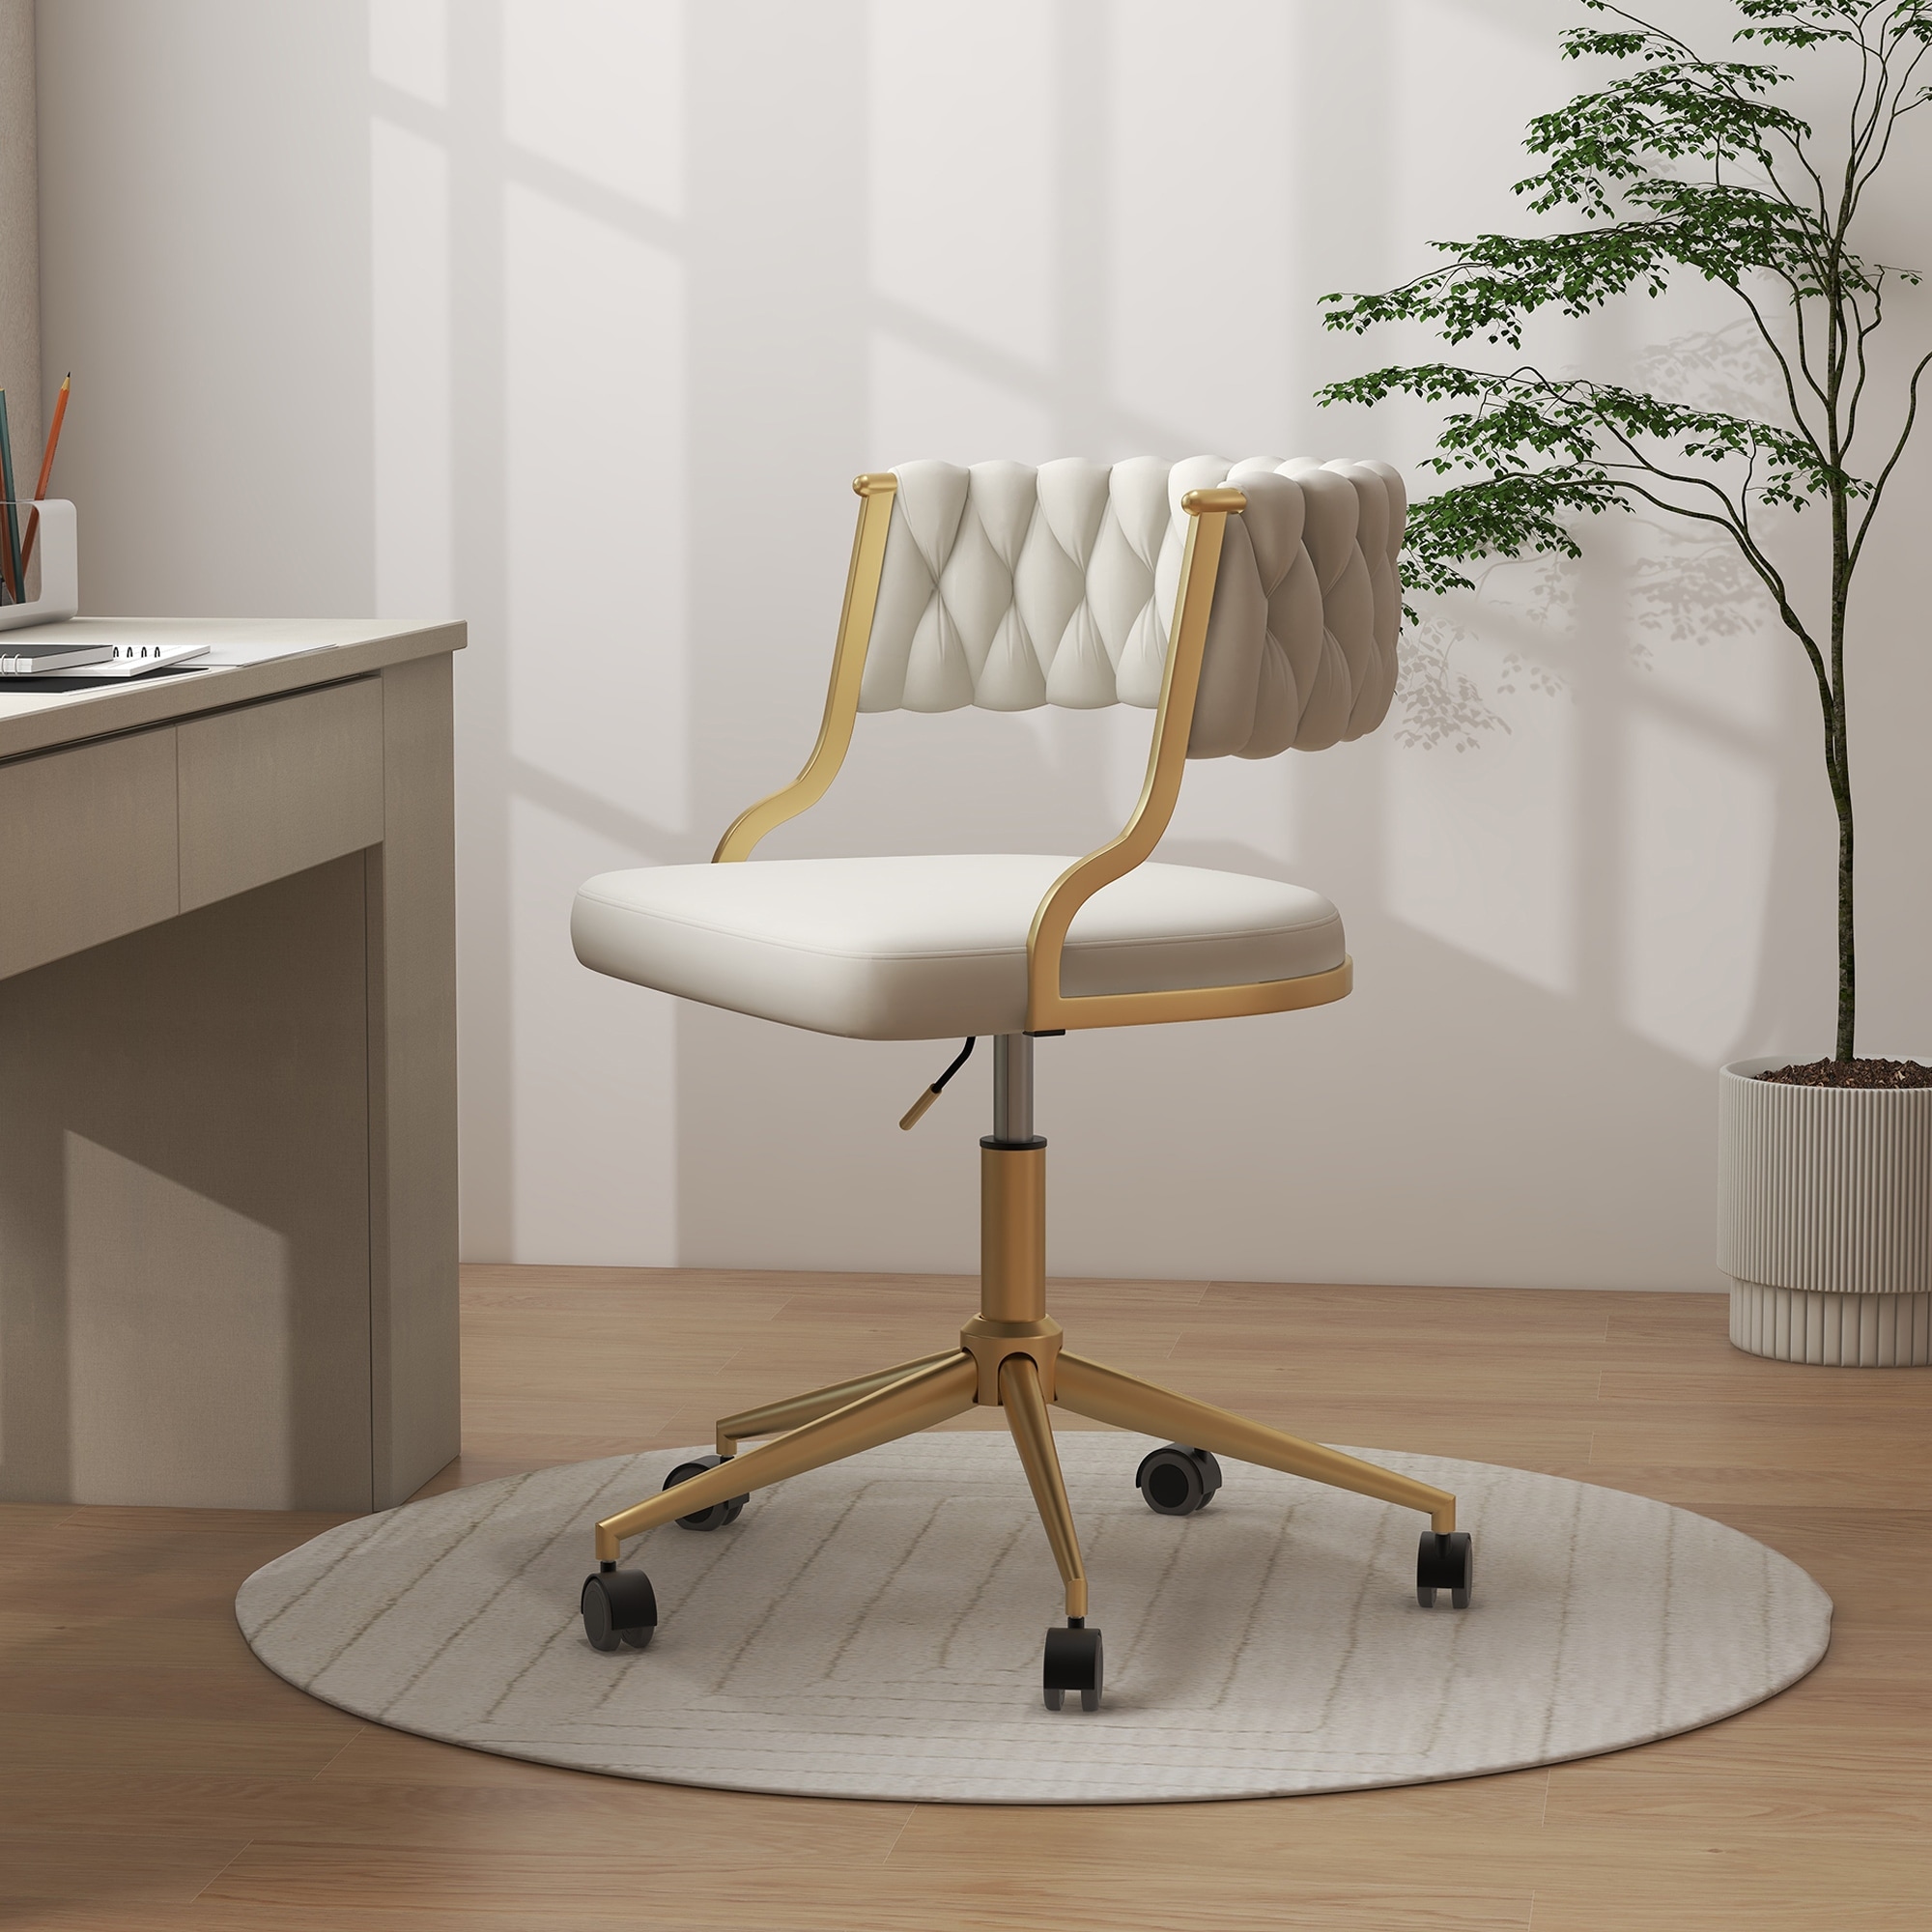 https://ak1.ostkcdn.com/images/products/is/images/direct/e1aaad28bc12fc0049c757fb9b0d582c2dd5656b/Velvet-Home-Desk-Chair-Office-Swivel-Chair-with-Wheels-and-Gold-Base.jpg